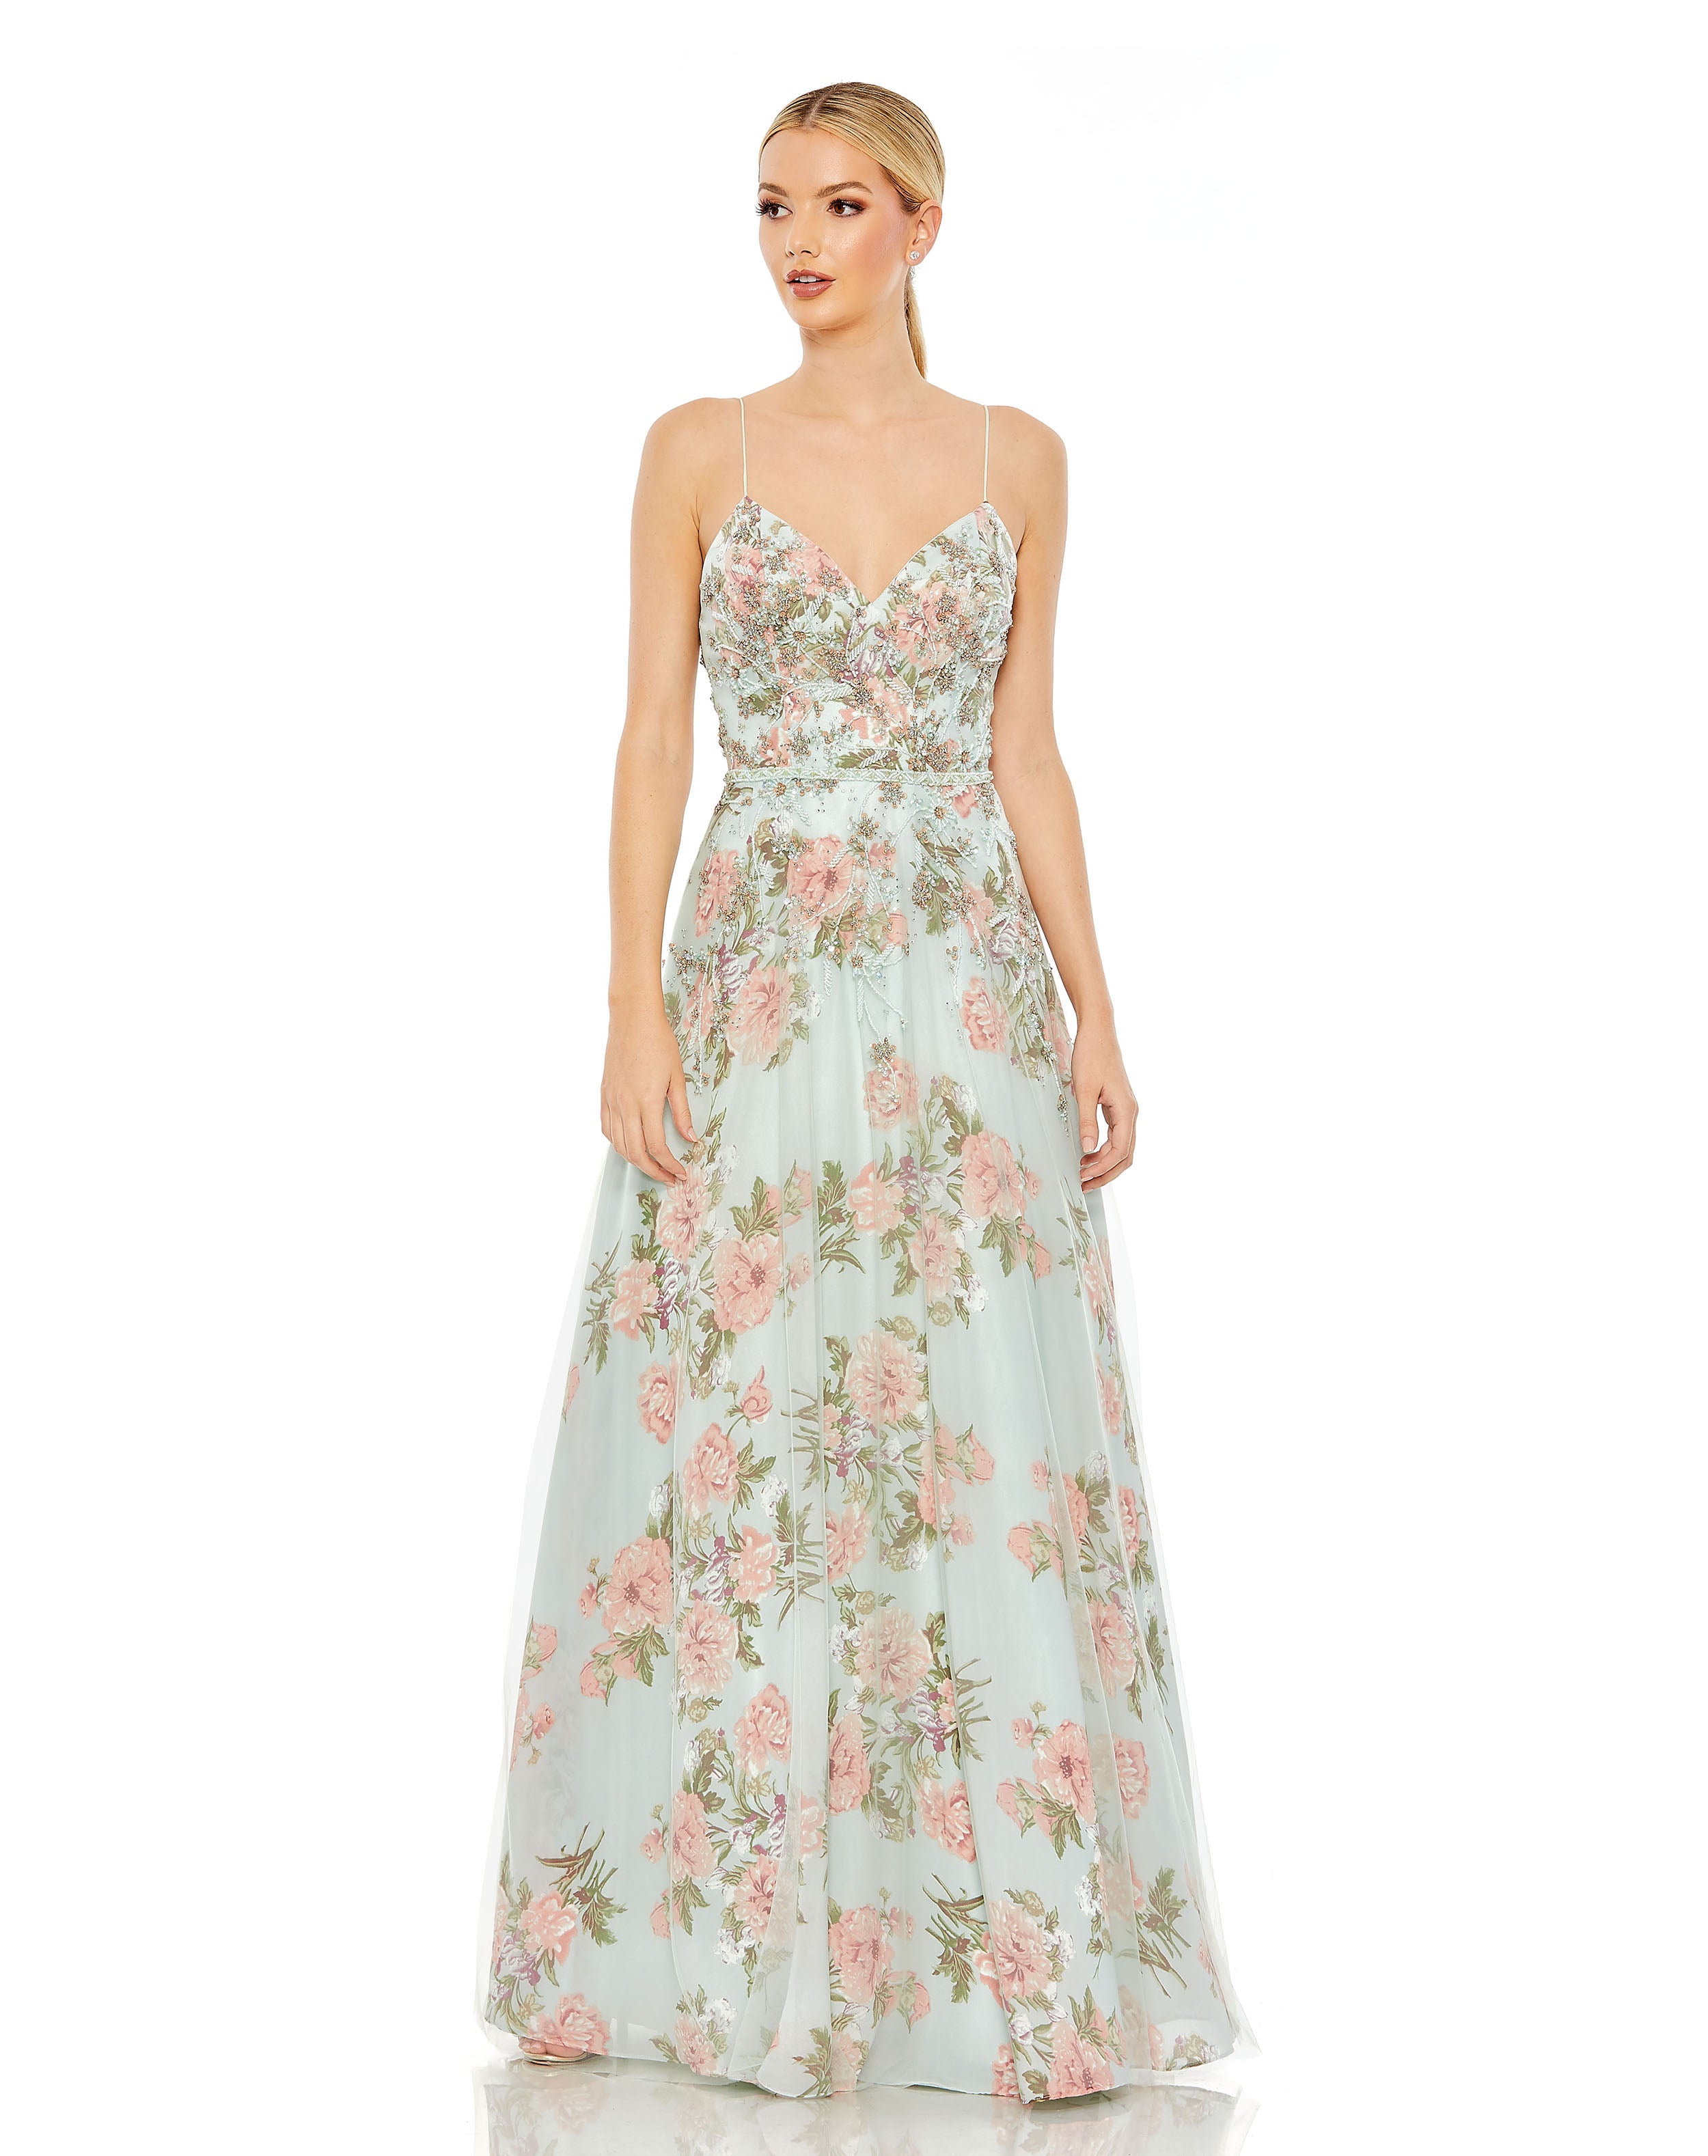 Embellished Lace Up Sleeveless Gown - FINAL SALE